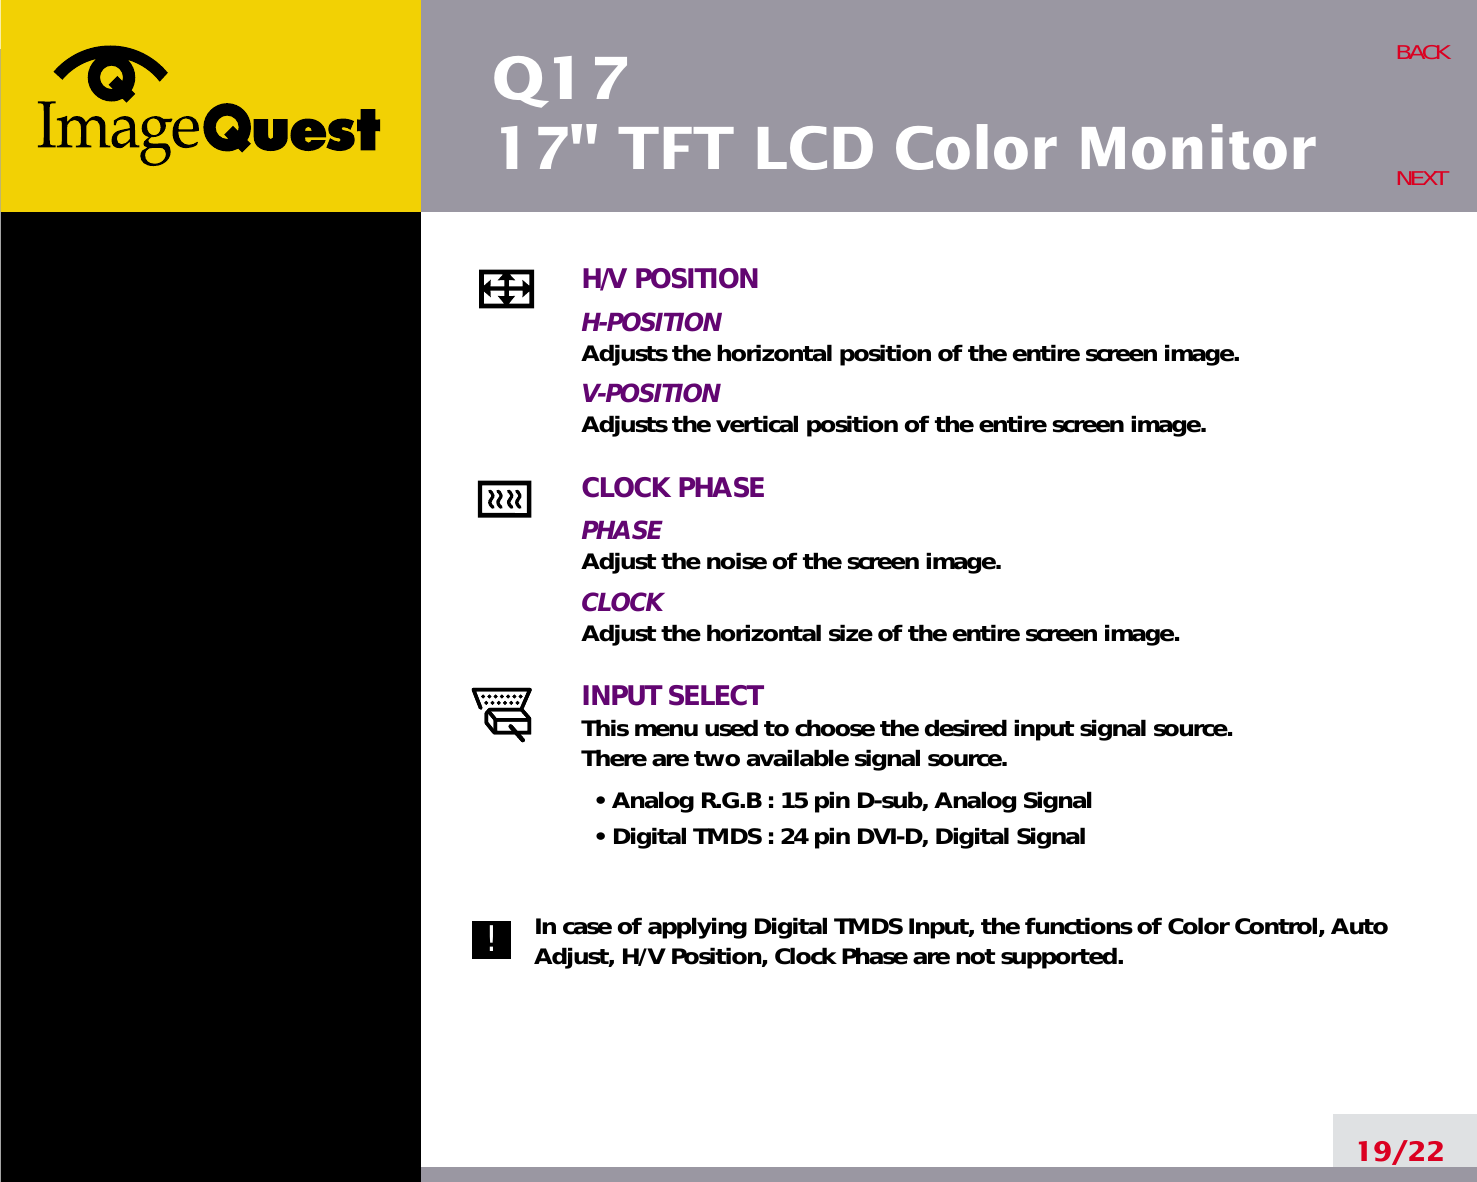 Q1717&quot; TFT LCD Color Monitor19/22BACKNEXTH/V POSITIONH-POSITIONAdjusts the horizontal position of the entire screen image.V-POSITIONAdjusts the vertical position of the entire screen image.CLOCK PHASEPHASEAdjust the noise of the screen image.CLOCKAdjust the horizontal size of the entire screen image.INPUT SELECTThis menu used to choose the desired input signal source.There are two available signal source.• Analog R.G.B : 15 pin D-sub, Analog Signal• Digital TMDS : 24 pin DVI-D, Digital SignalIn case of applying Digital TMDS Input, the functions of Color Control, AutoAdjust, H/V Position, Clock Phase are not supported.!